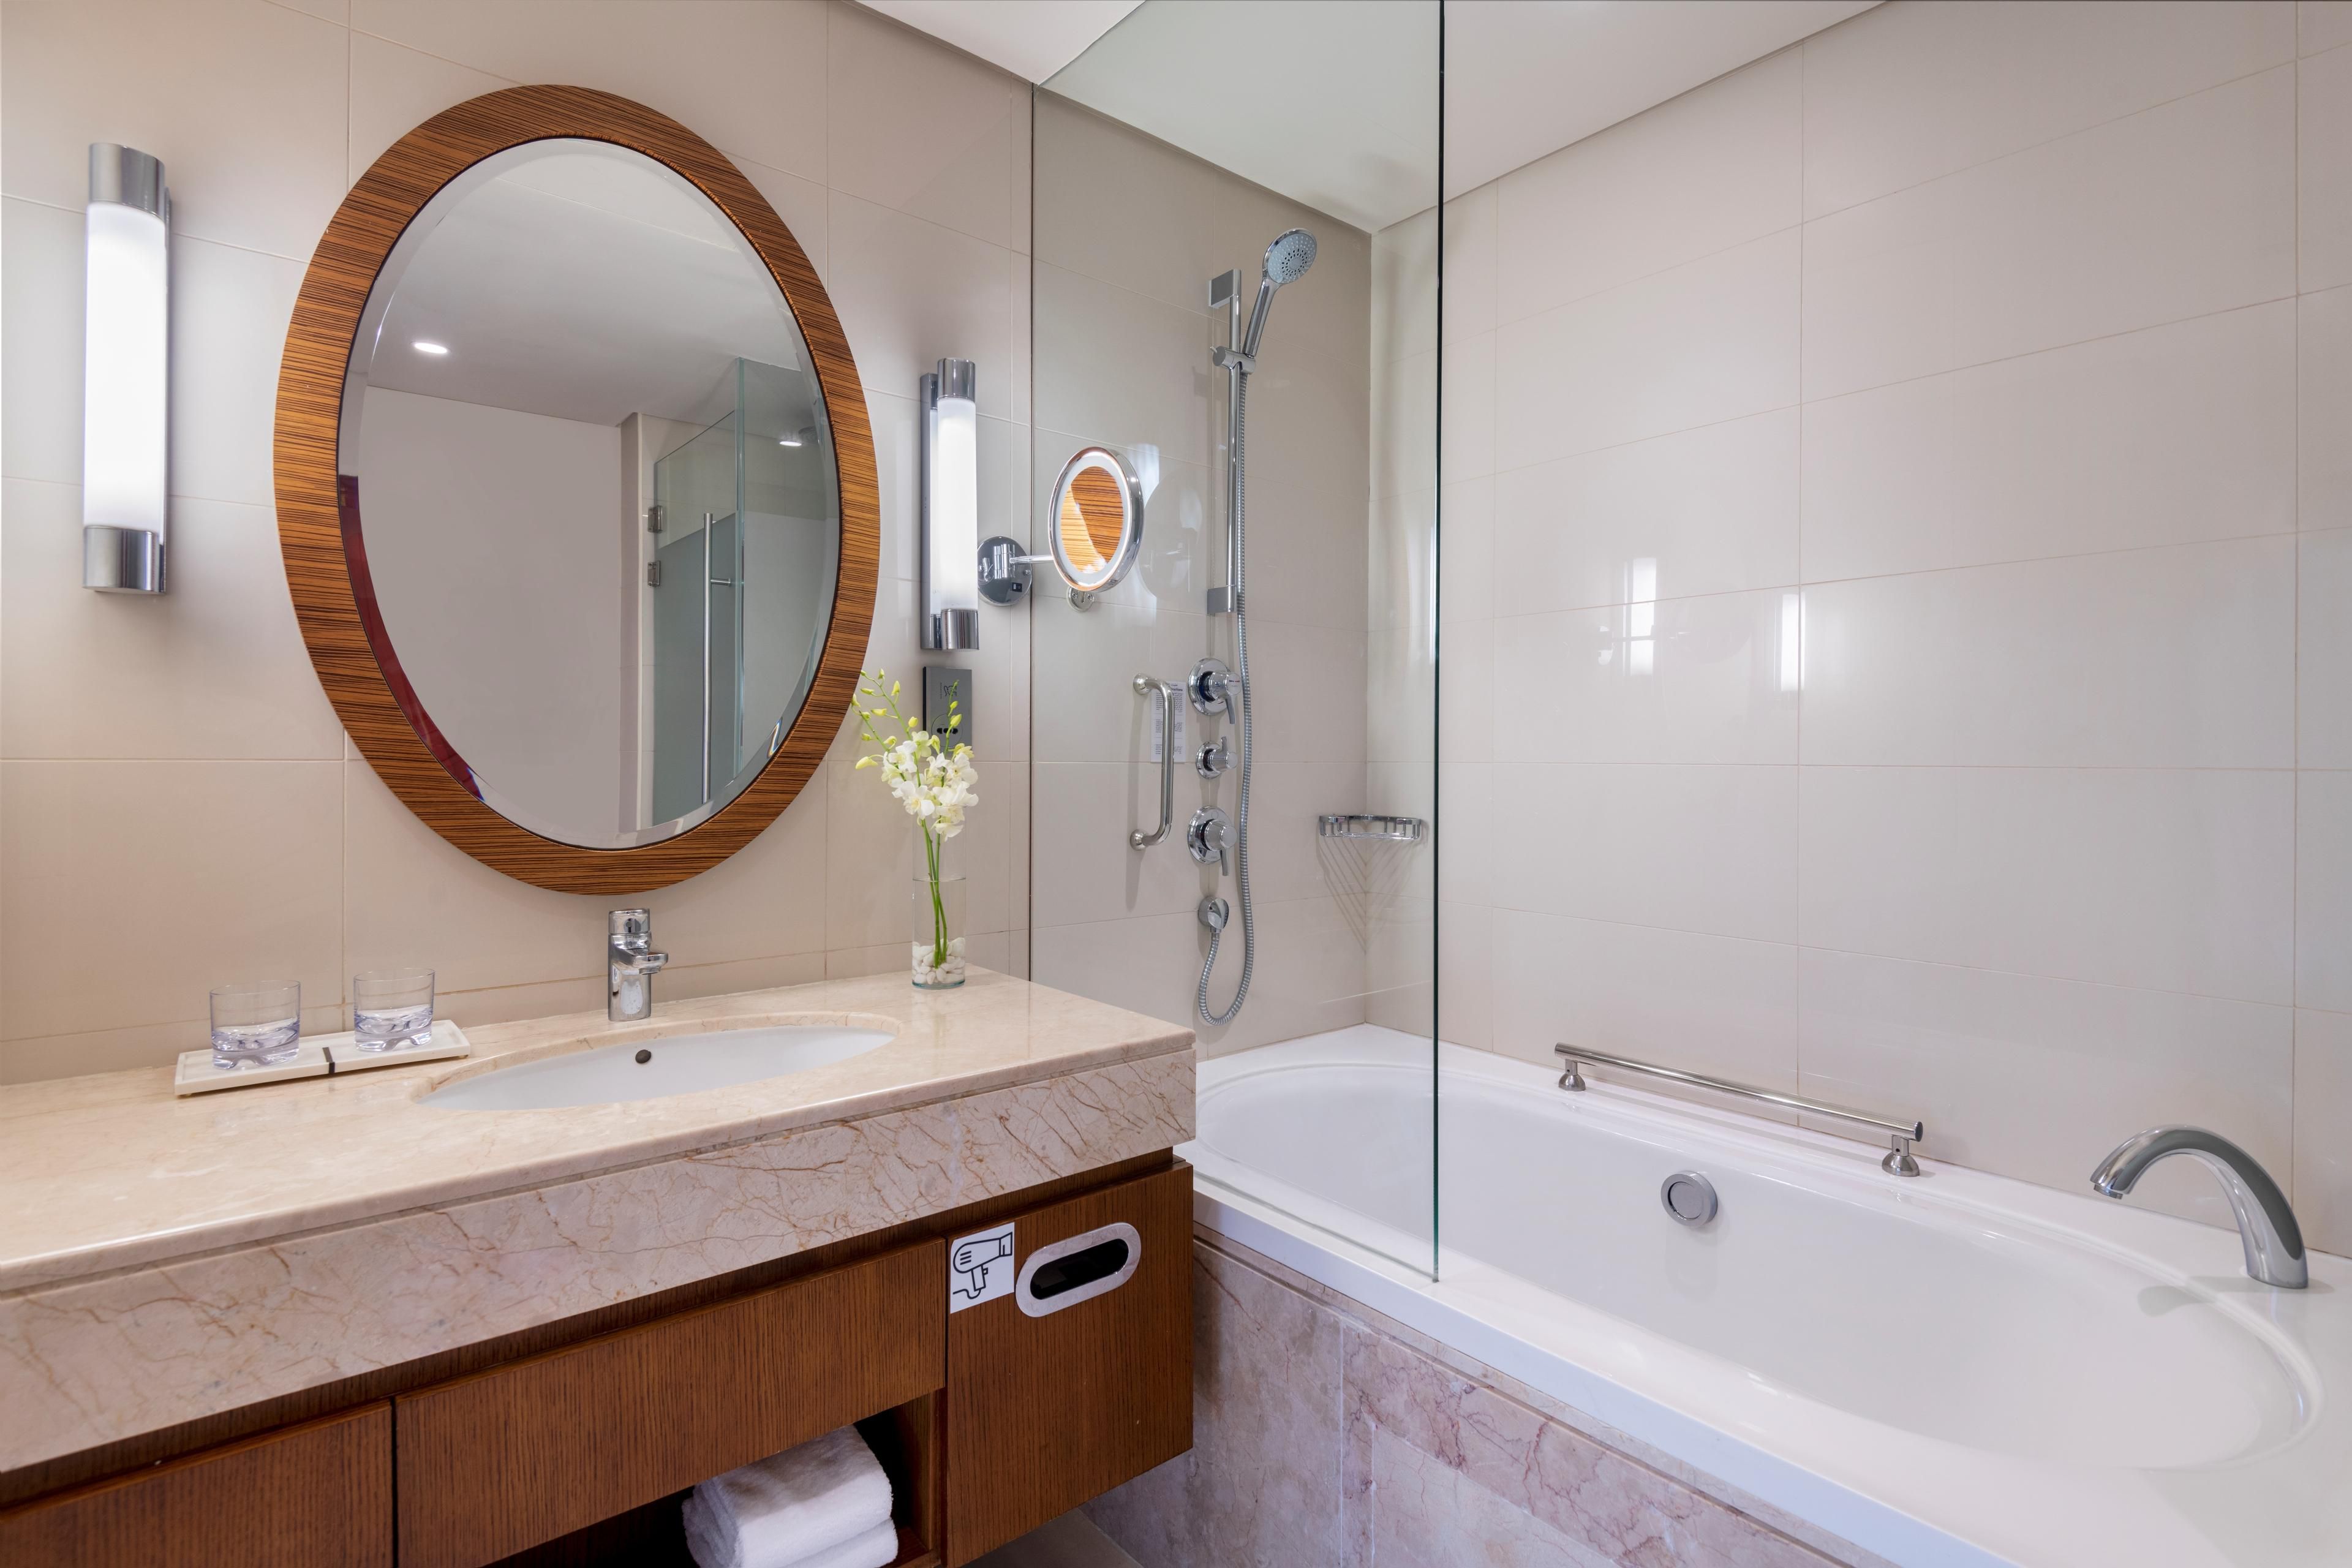 Bathroom in our Diplomatic Suite features an in-tub shower